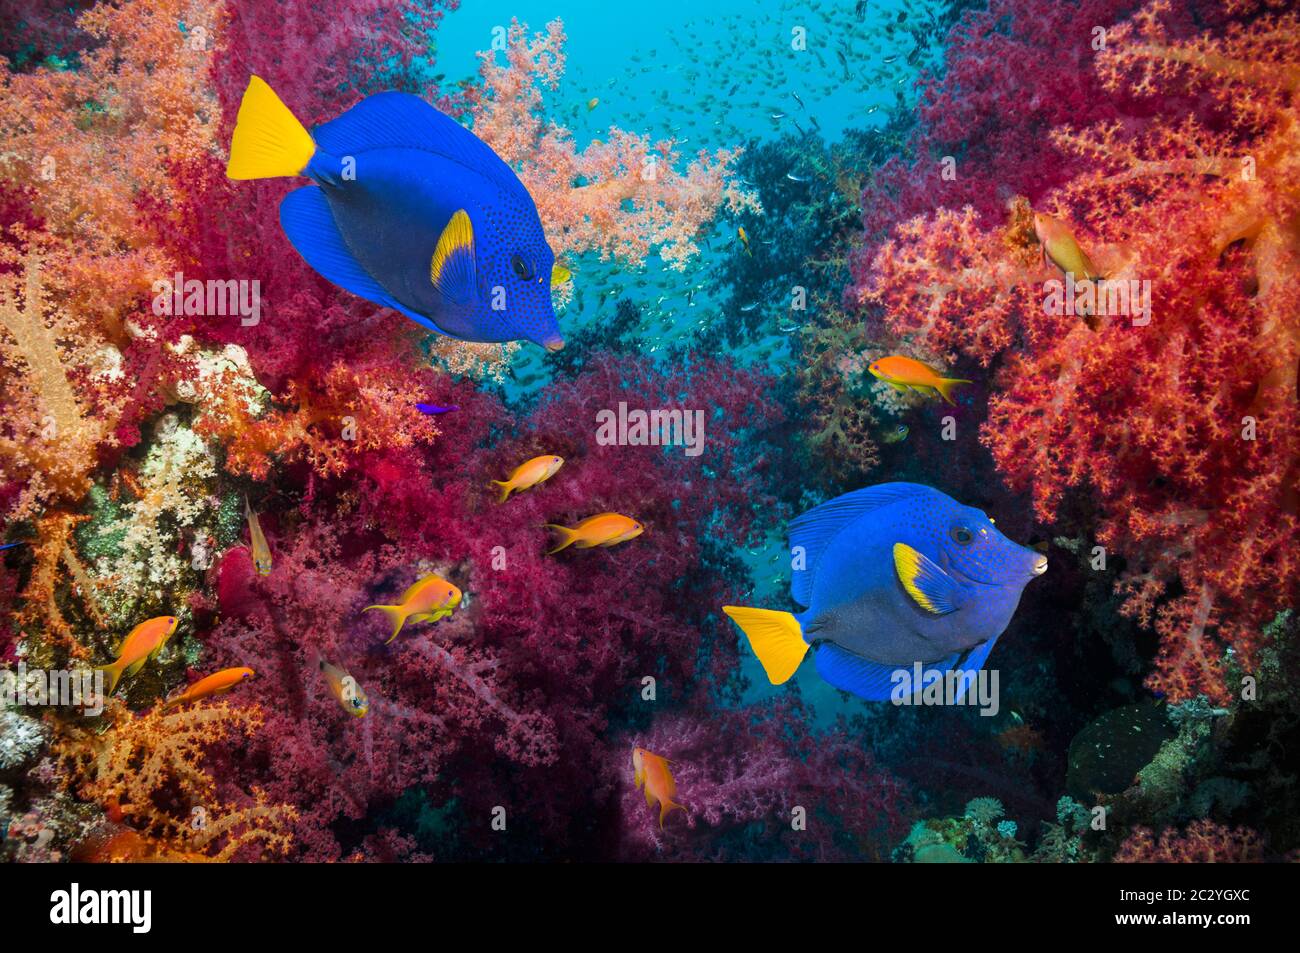 Yellowtail tang or surgeonfish (Zebrasoma xanthurum) swimming over coral reef with soft corals.  Egypt, Red Sea. Stock Photo